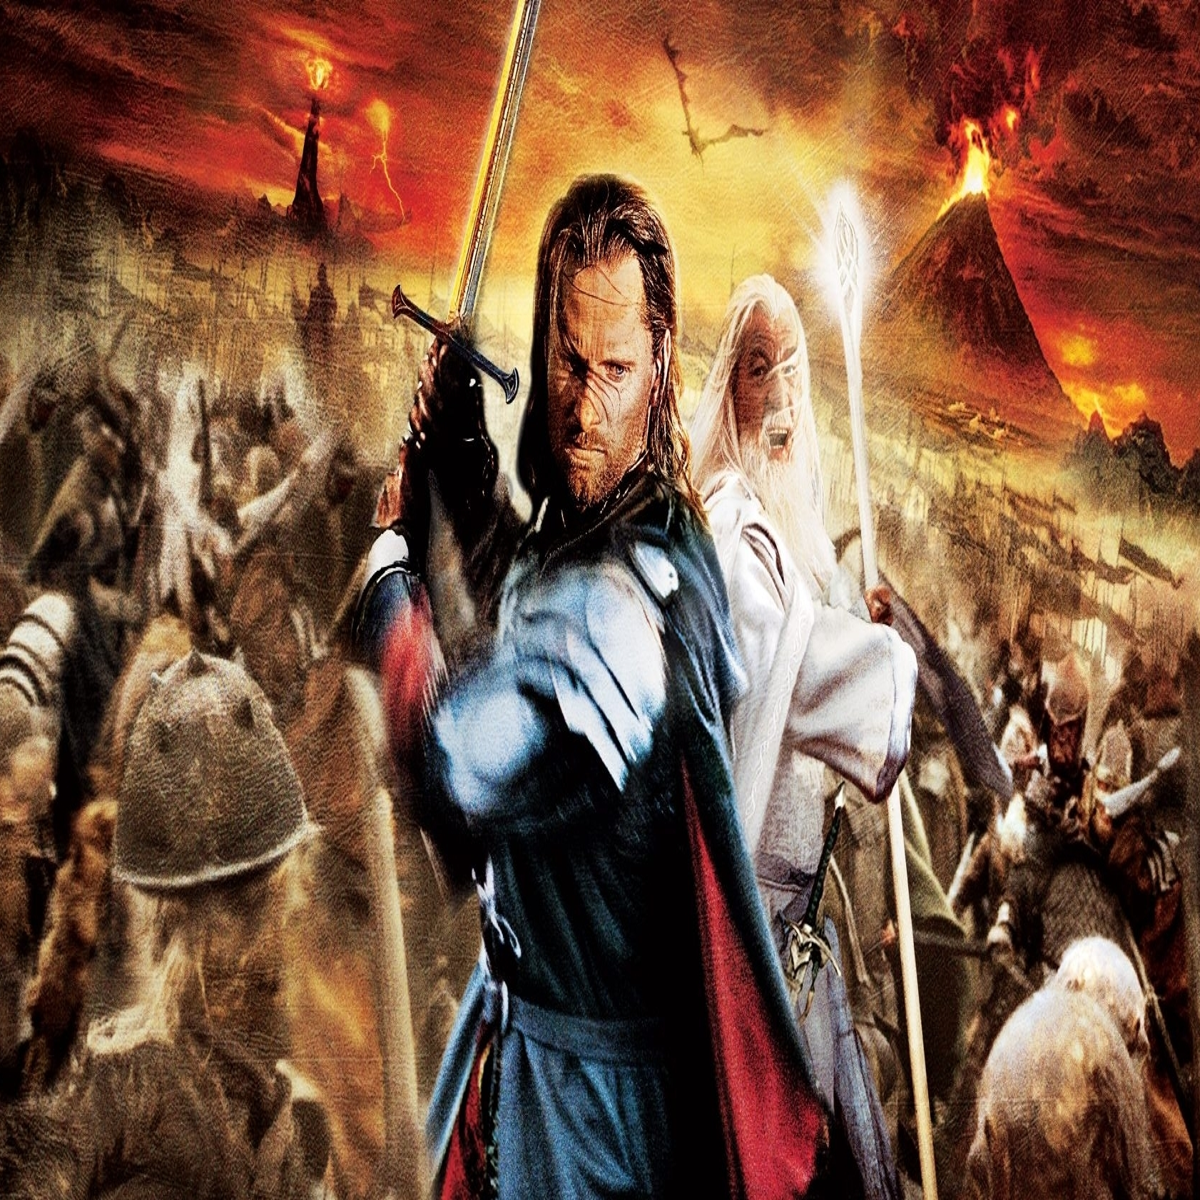 Lord of the Rings: The Return of the King - Movies on Google Play